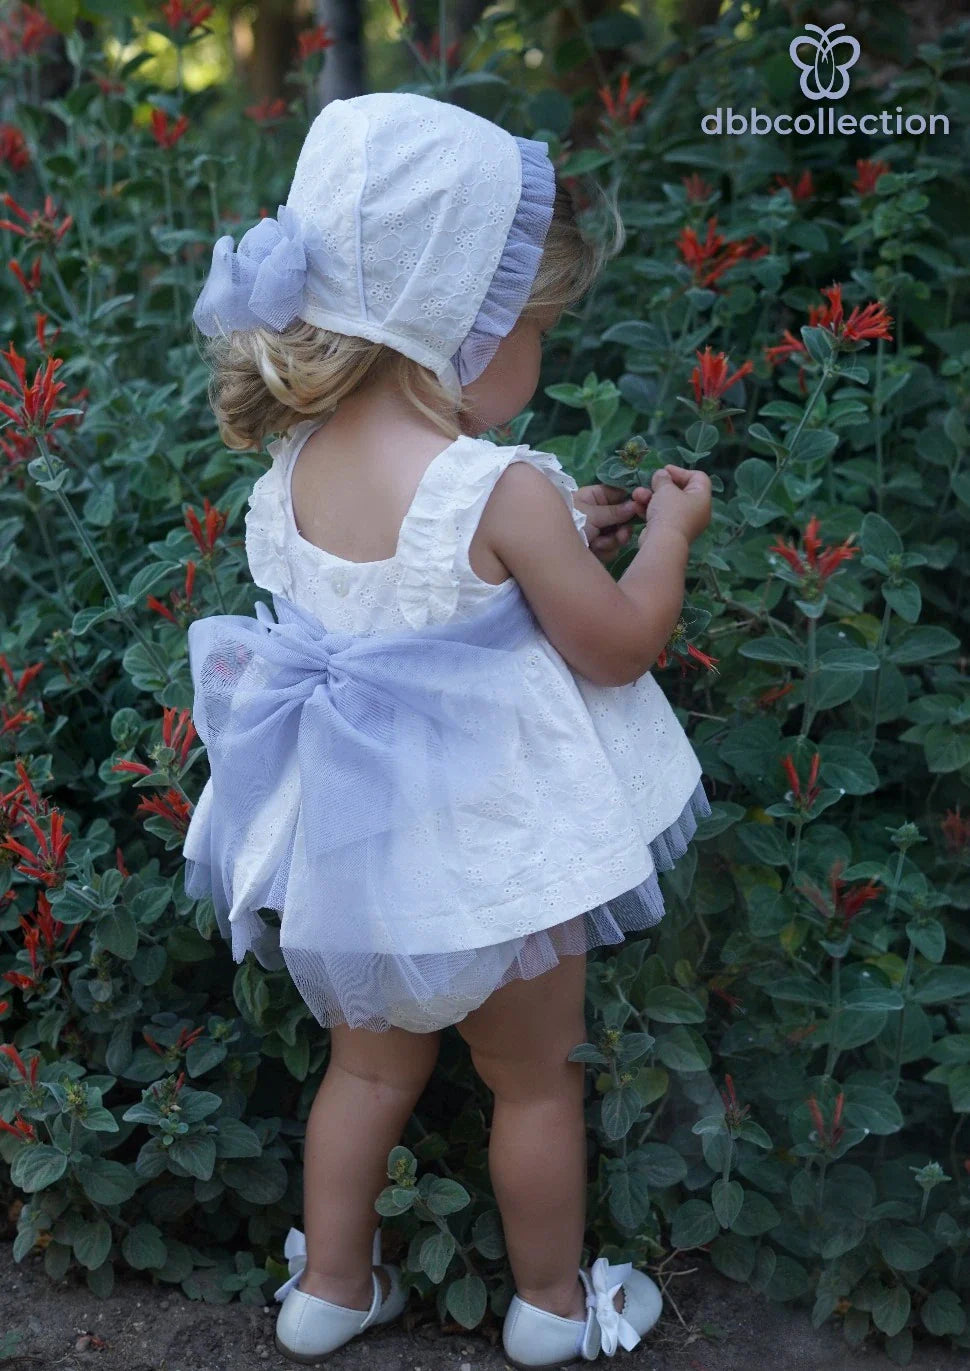 violeta dress set from dbb collections available at tors childrens wear